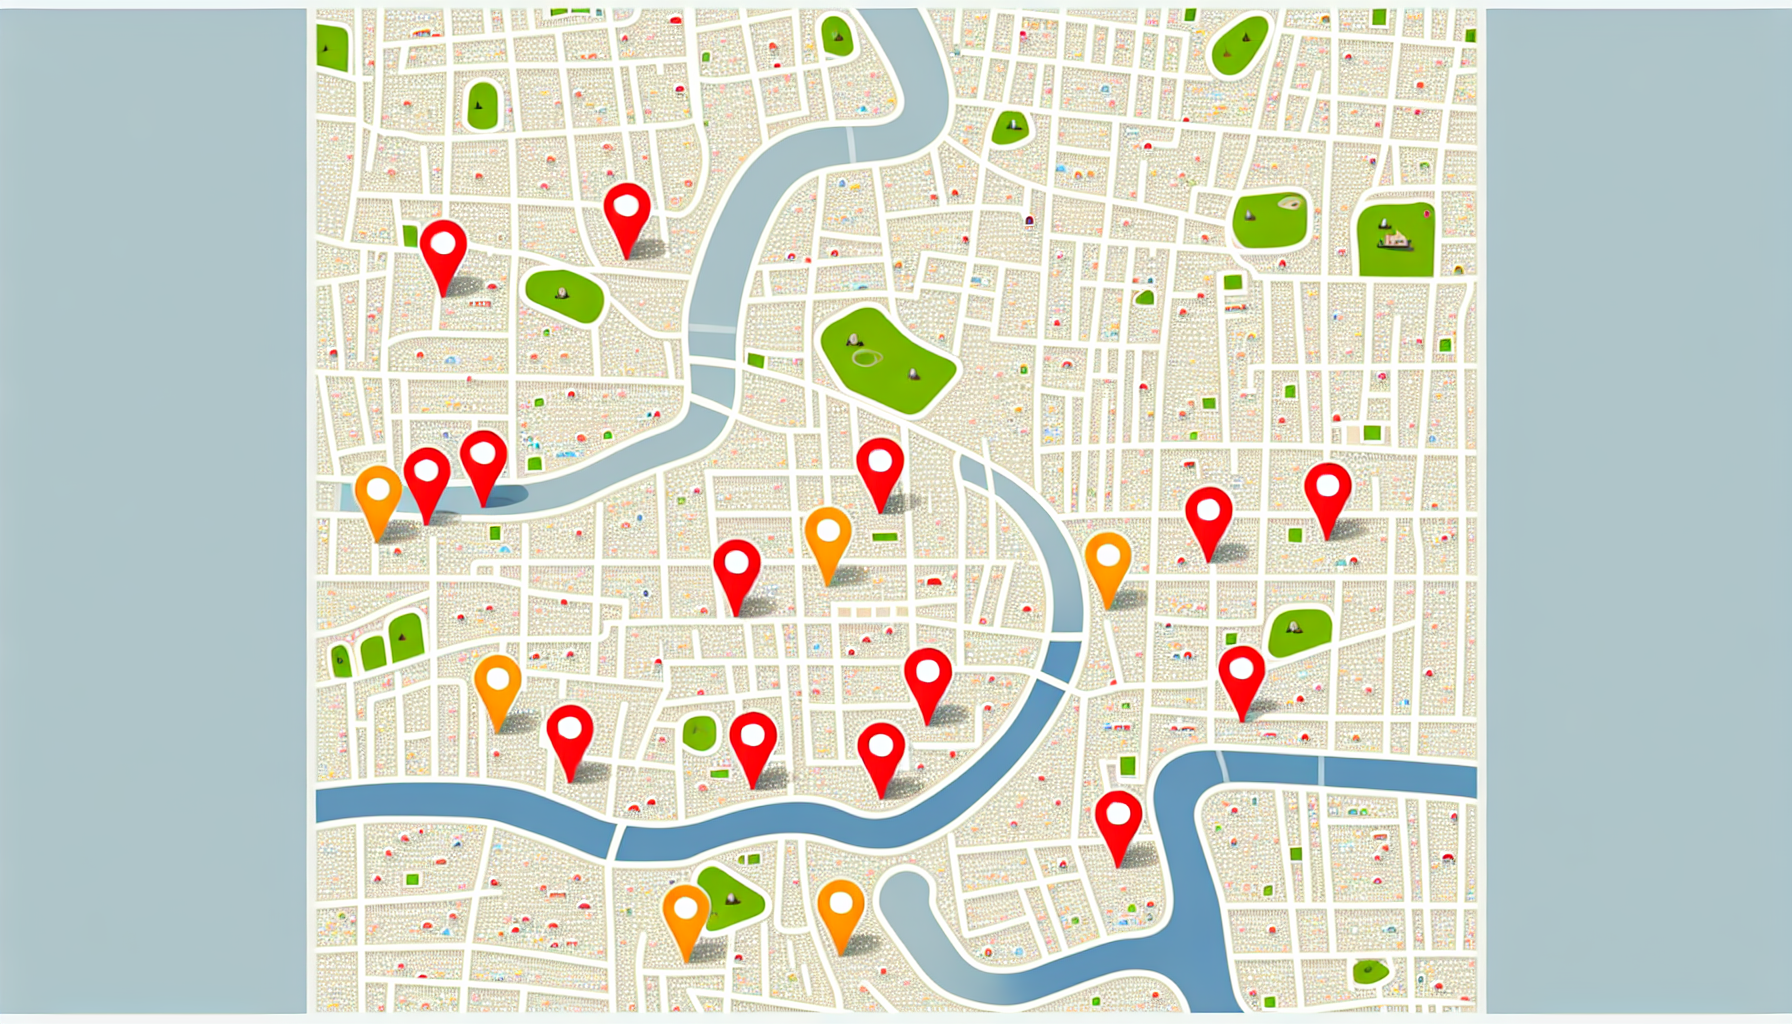 A map with location pins indicating local business presence